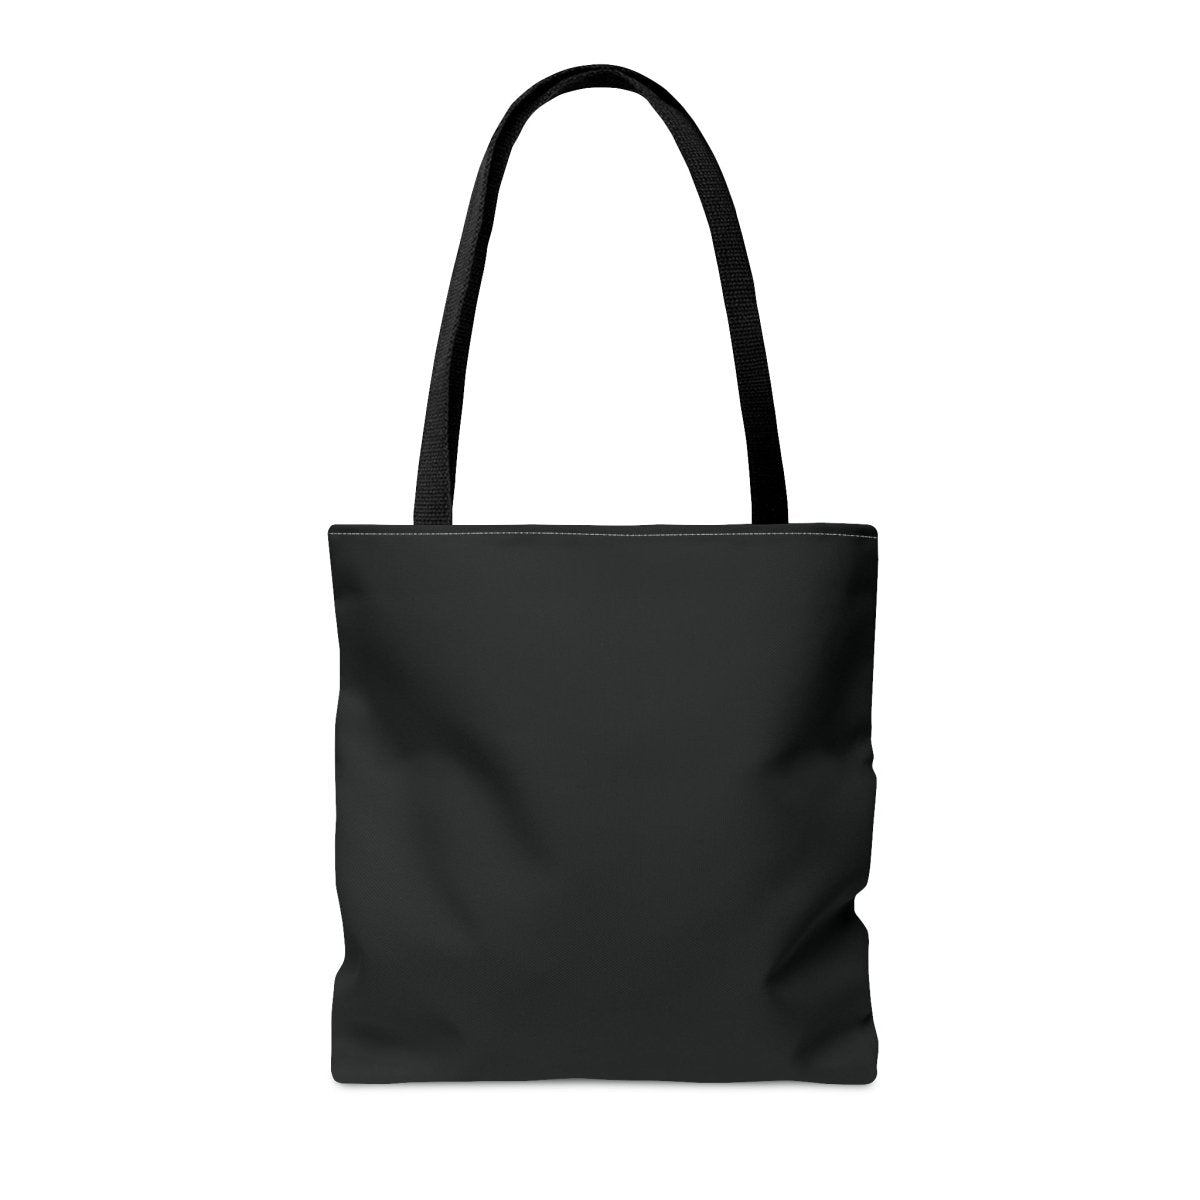 Royal Dog Tote Bag - Style A - DarzyStore